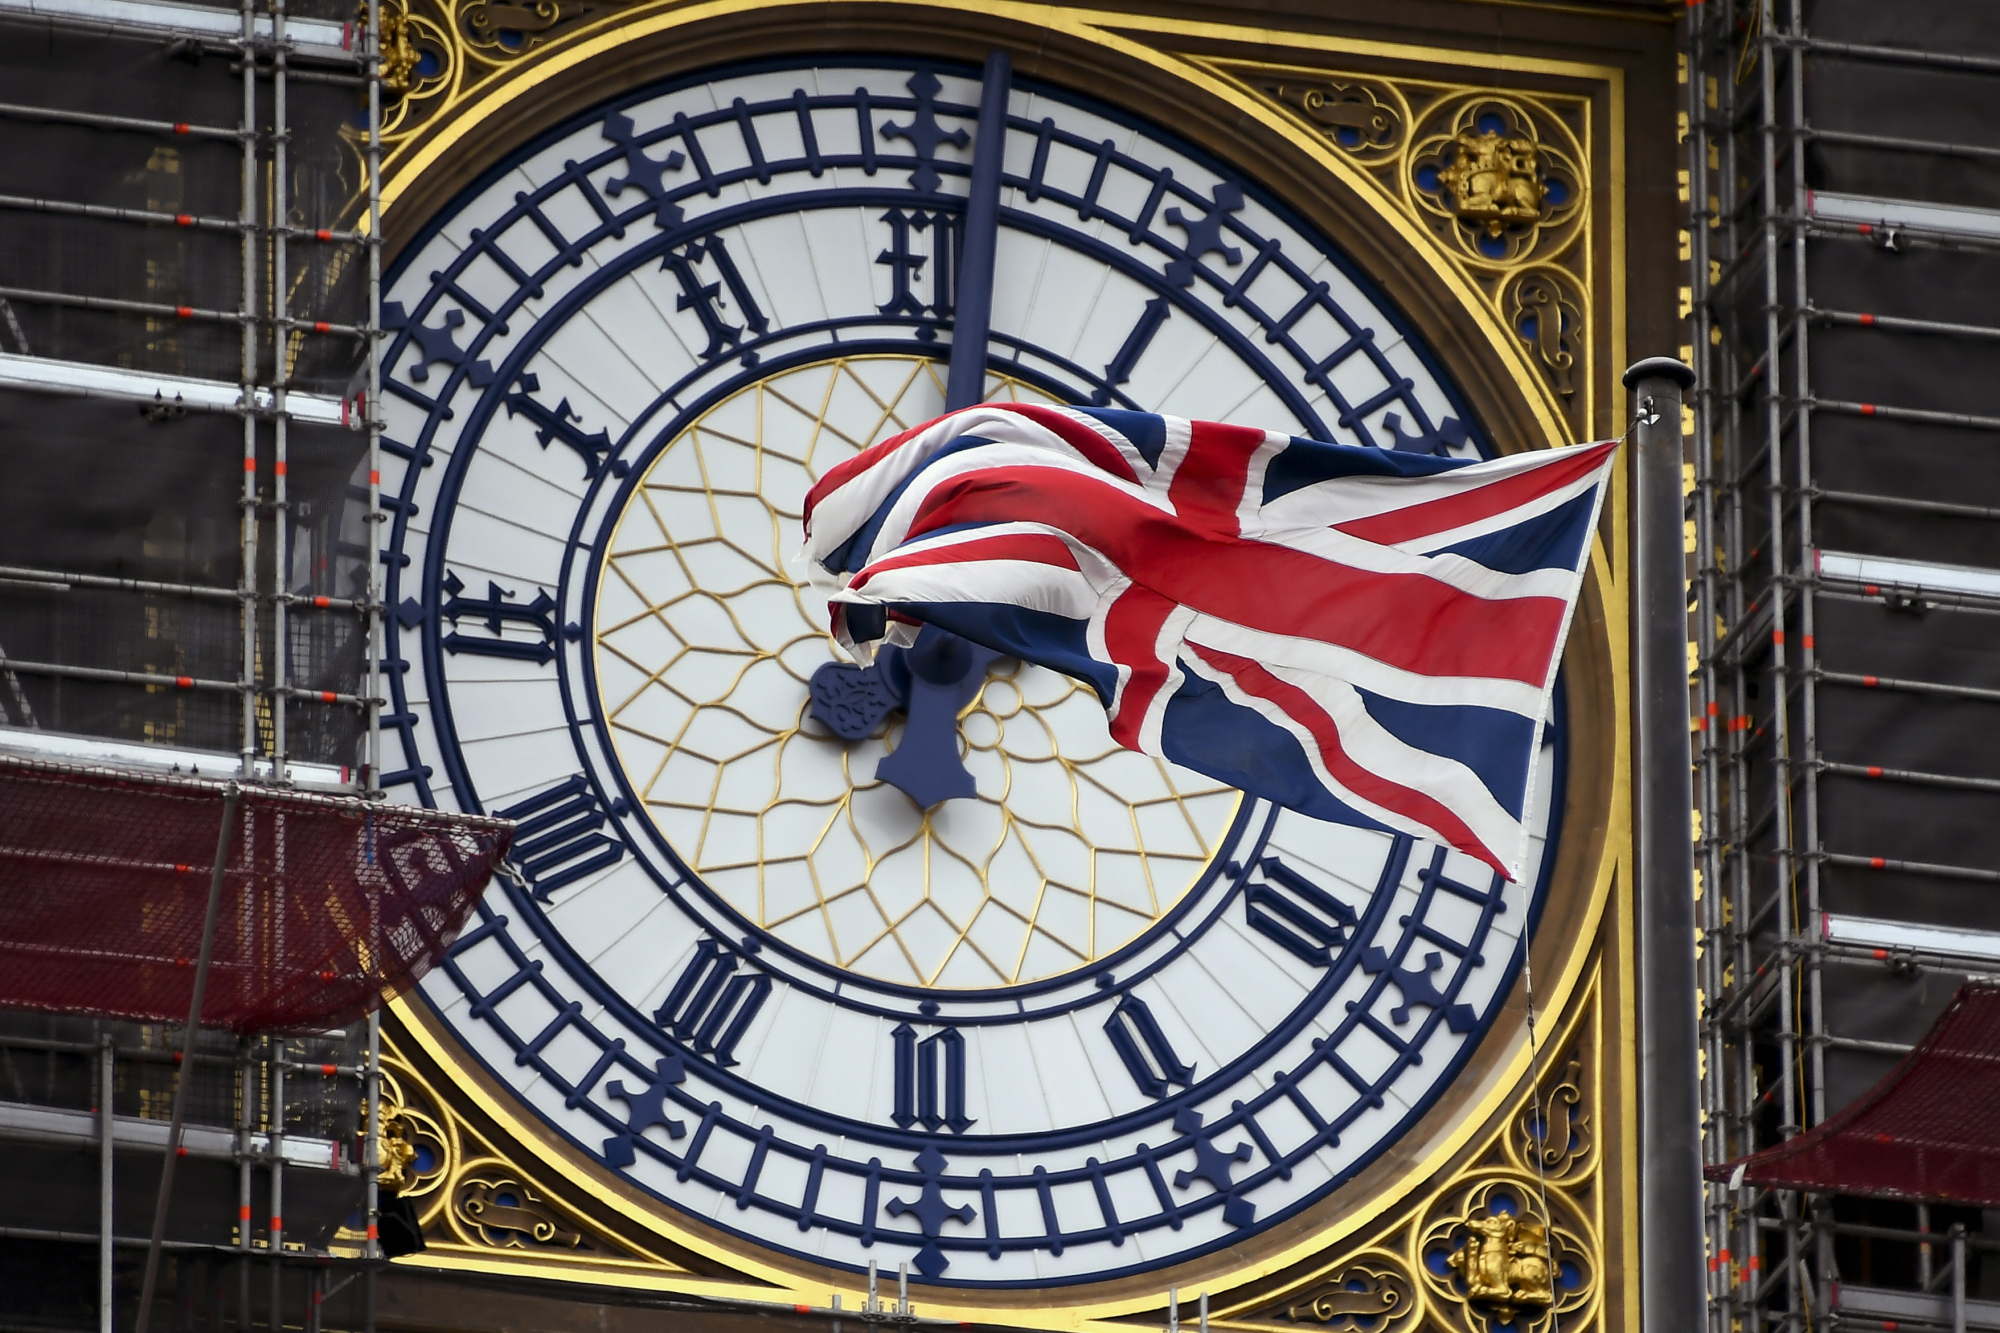 A U.K. flag waves against the backdrop of the clock facade of the Elizabeth Tower, which holds the bell known as Big Ben, in London on Friday. | AP